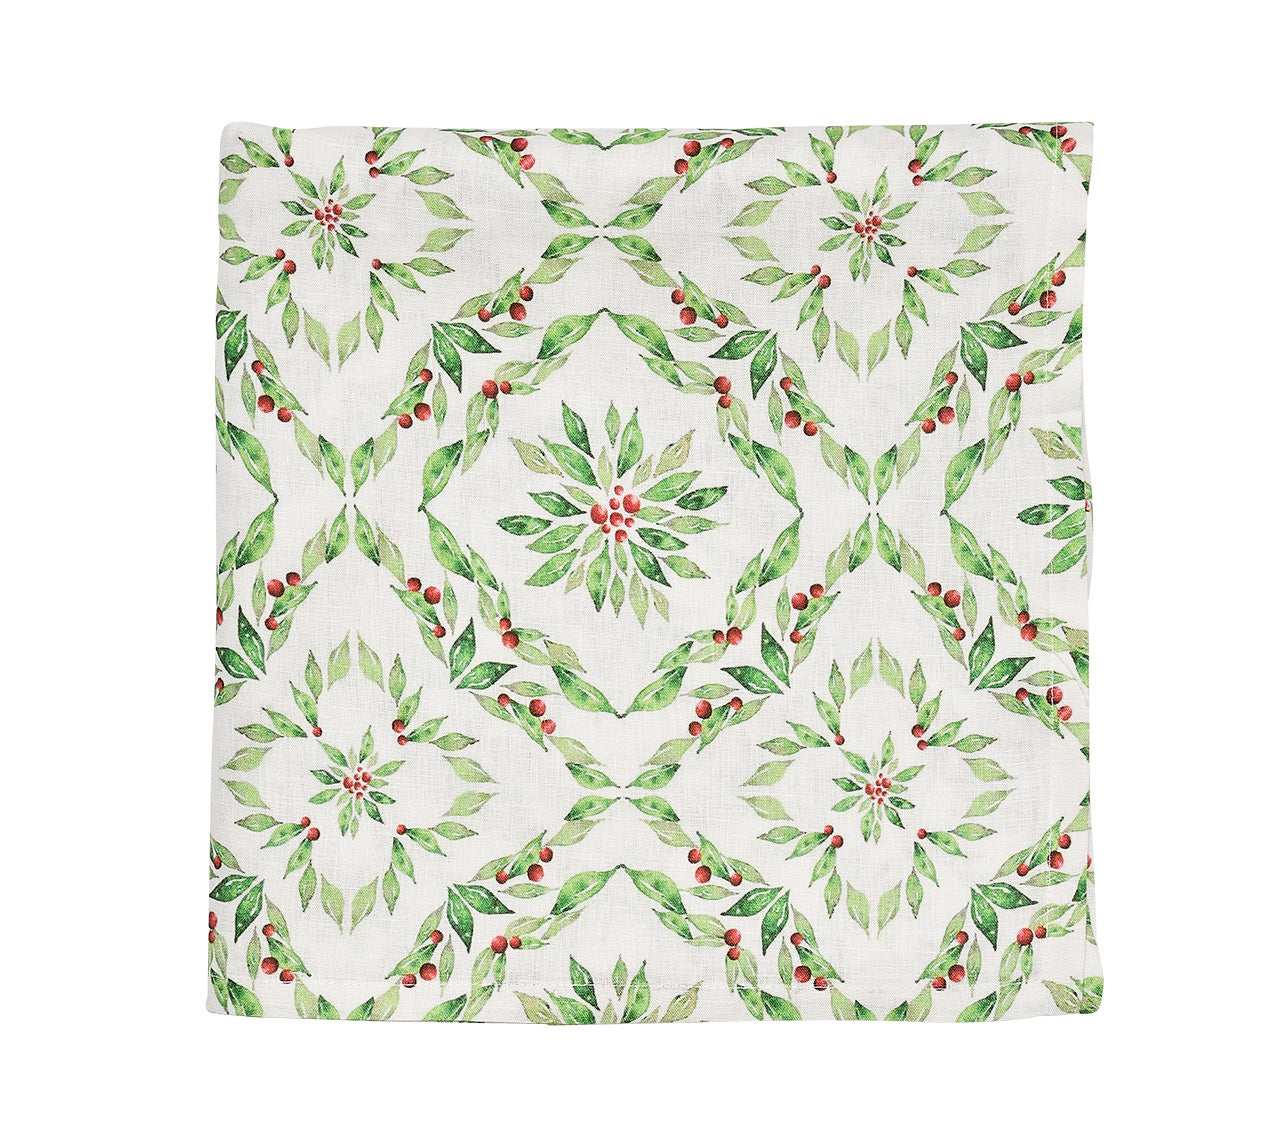 Laurel Tablecloth in White & Green